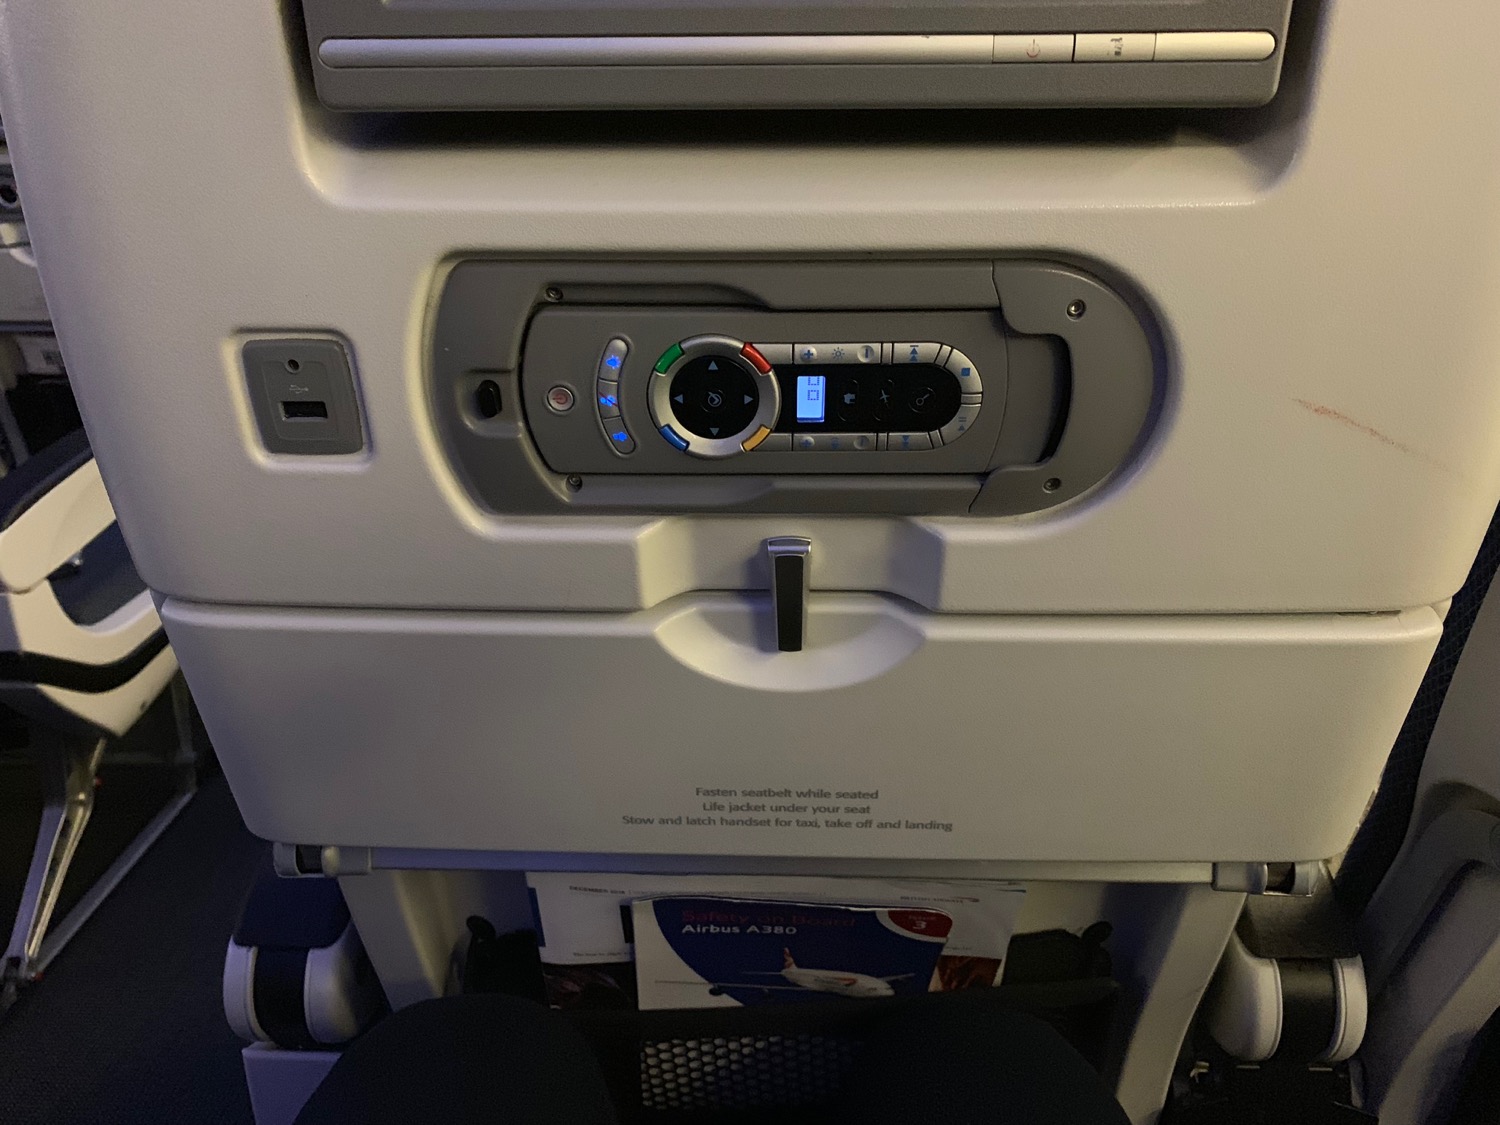 a control panel on an airplane